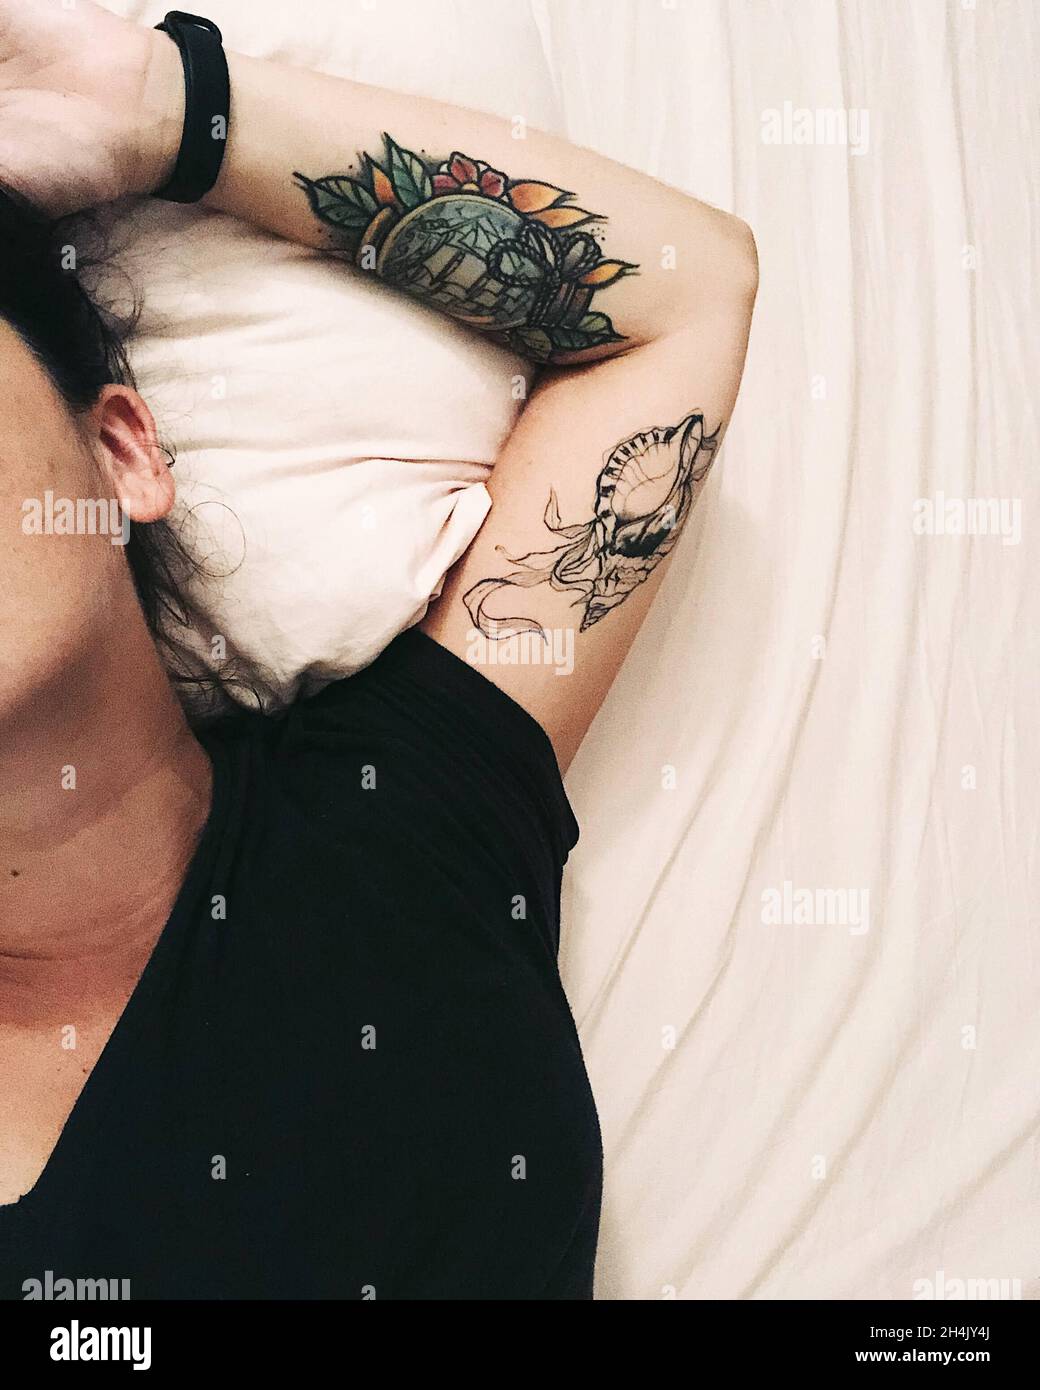 How to Sleep With a New Tattoo - 10 Safety & Hygiene Tips